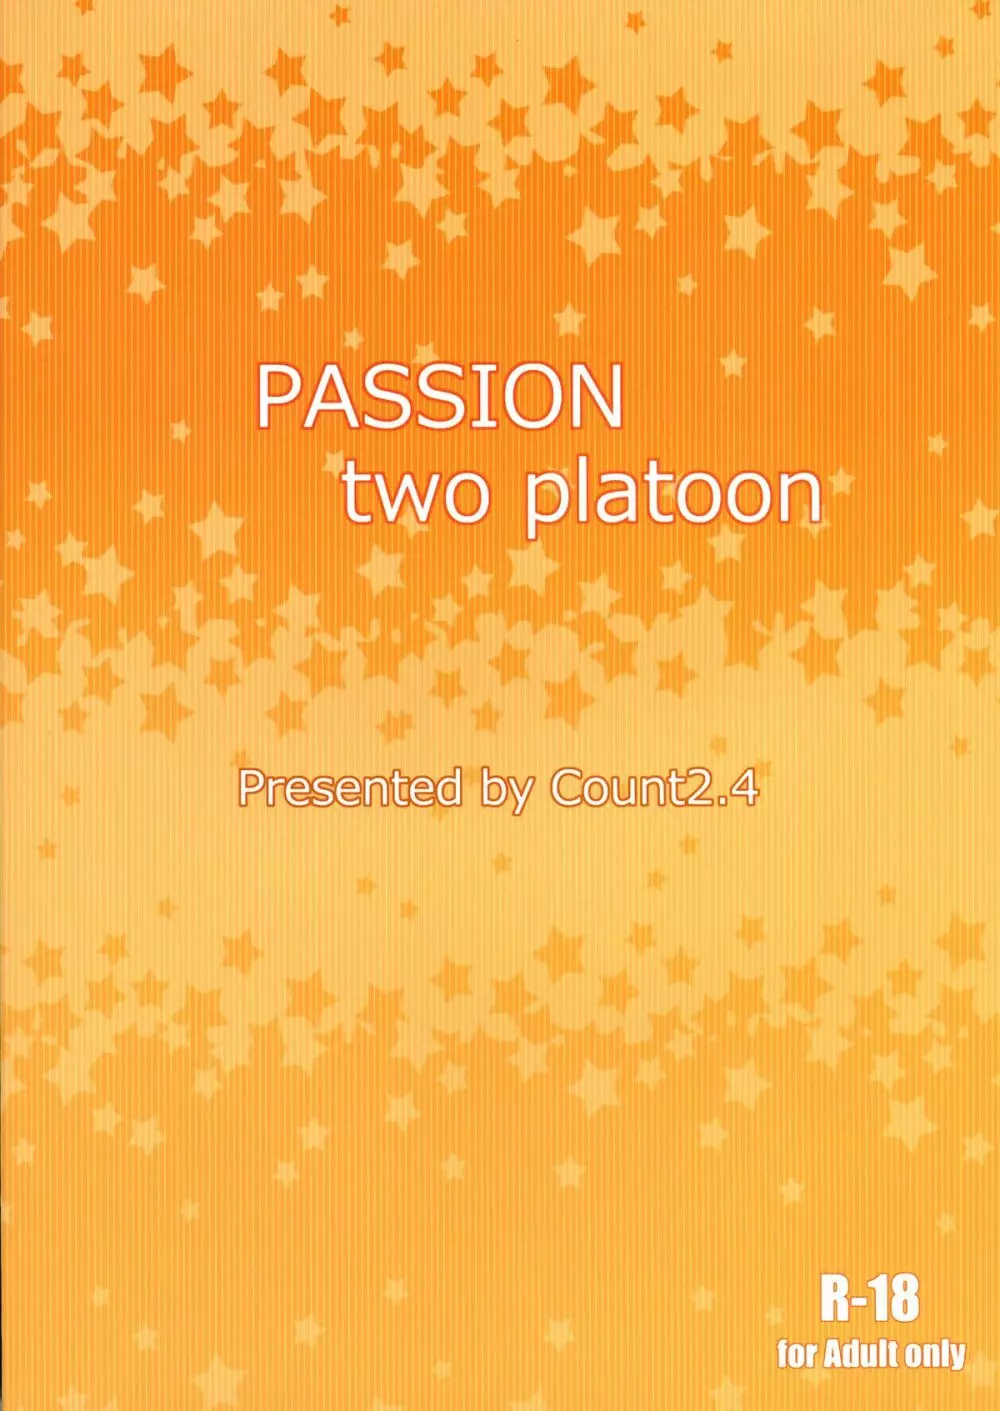 PASSION two platoon Page.2